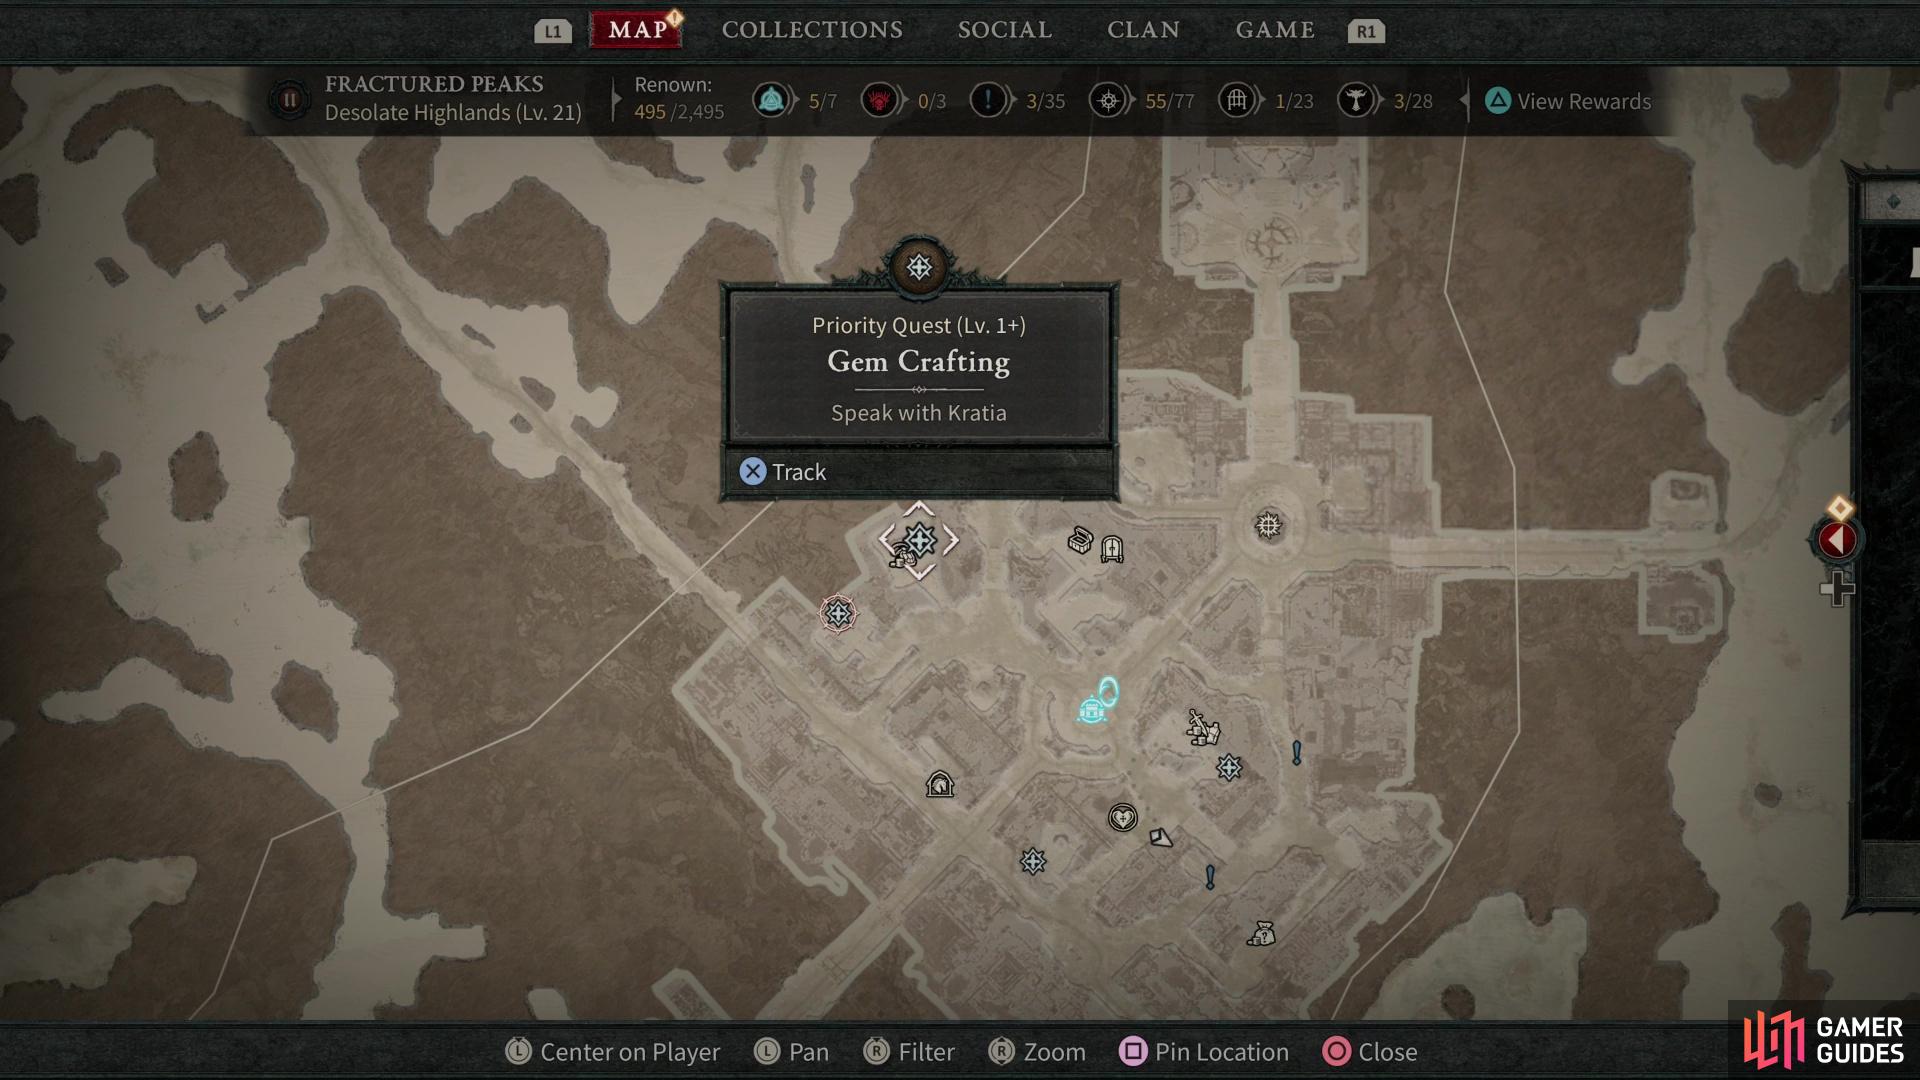 Once you hit Lv20, you’ll get the “!Gem Crafting” tutorial quest, pointing you to the newly-unlocked Jeweler.